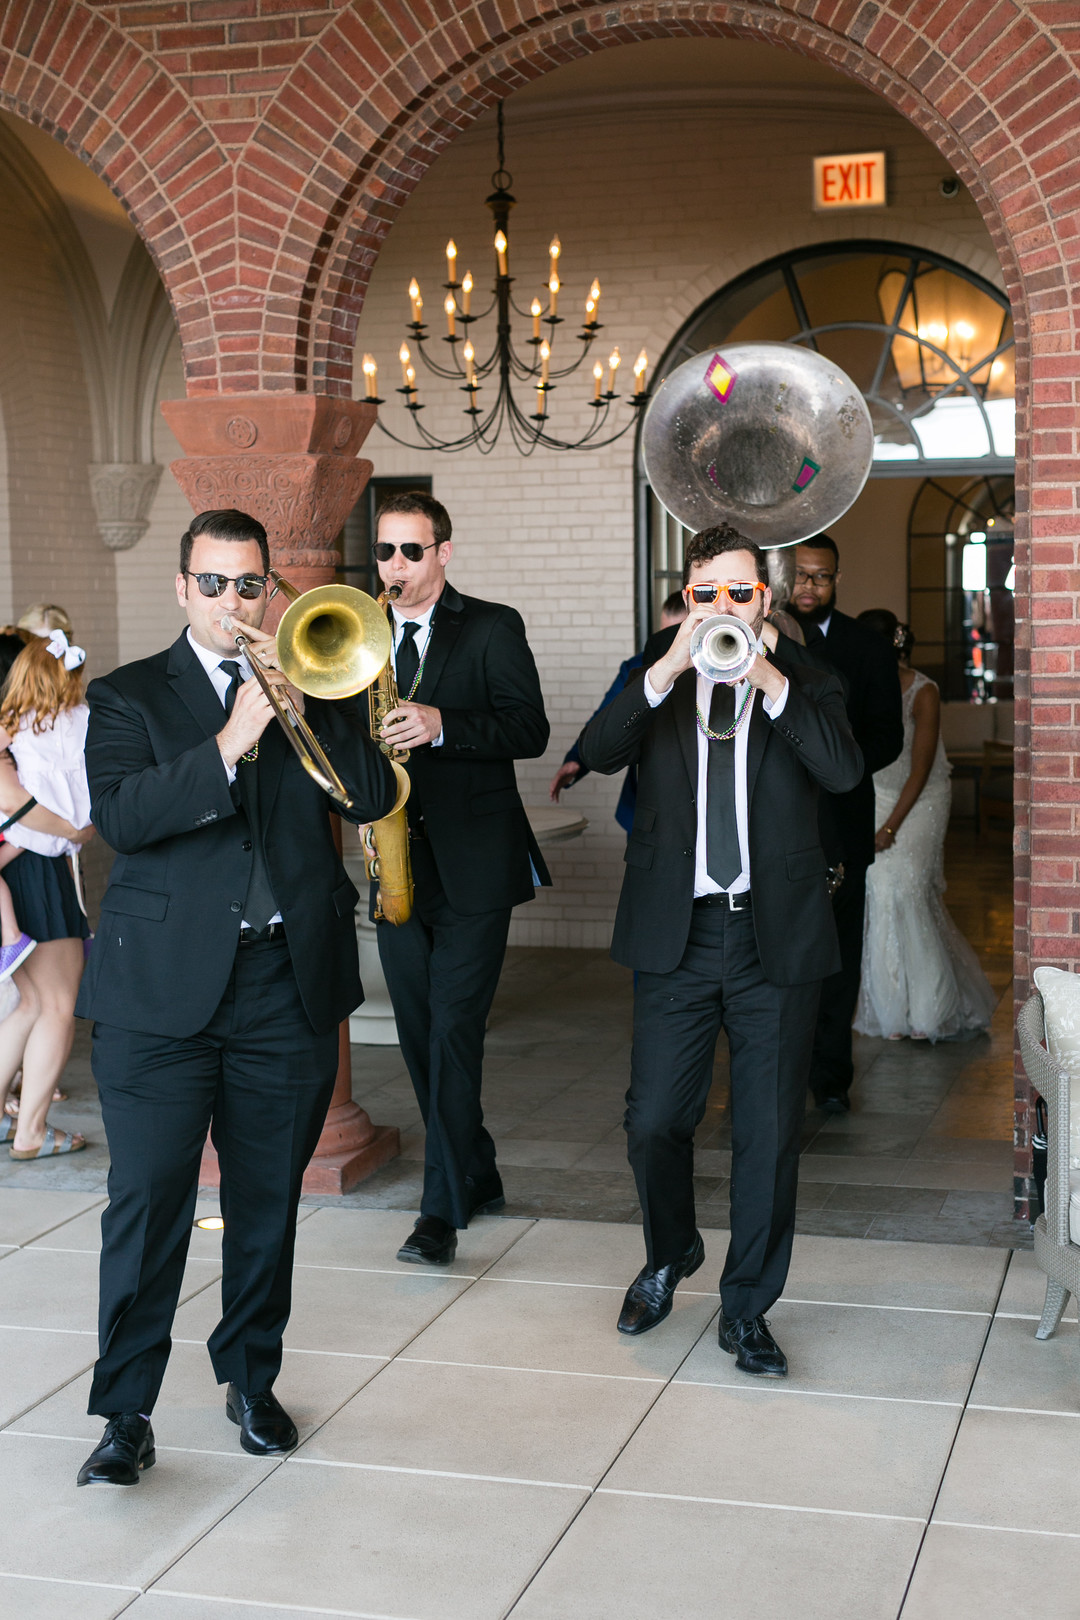 Wedding band: Vibrant and Historic Chicago Wedding with a Second Line Band captured by Emilia Jane Photography. See more unique wedding ideas on CHItheeWED.com!